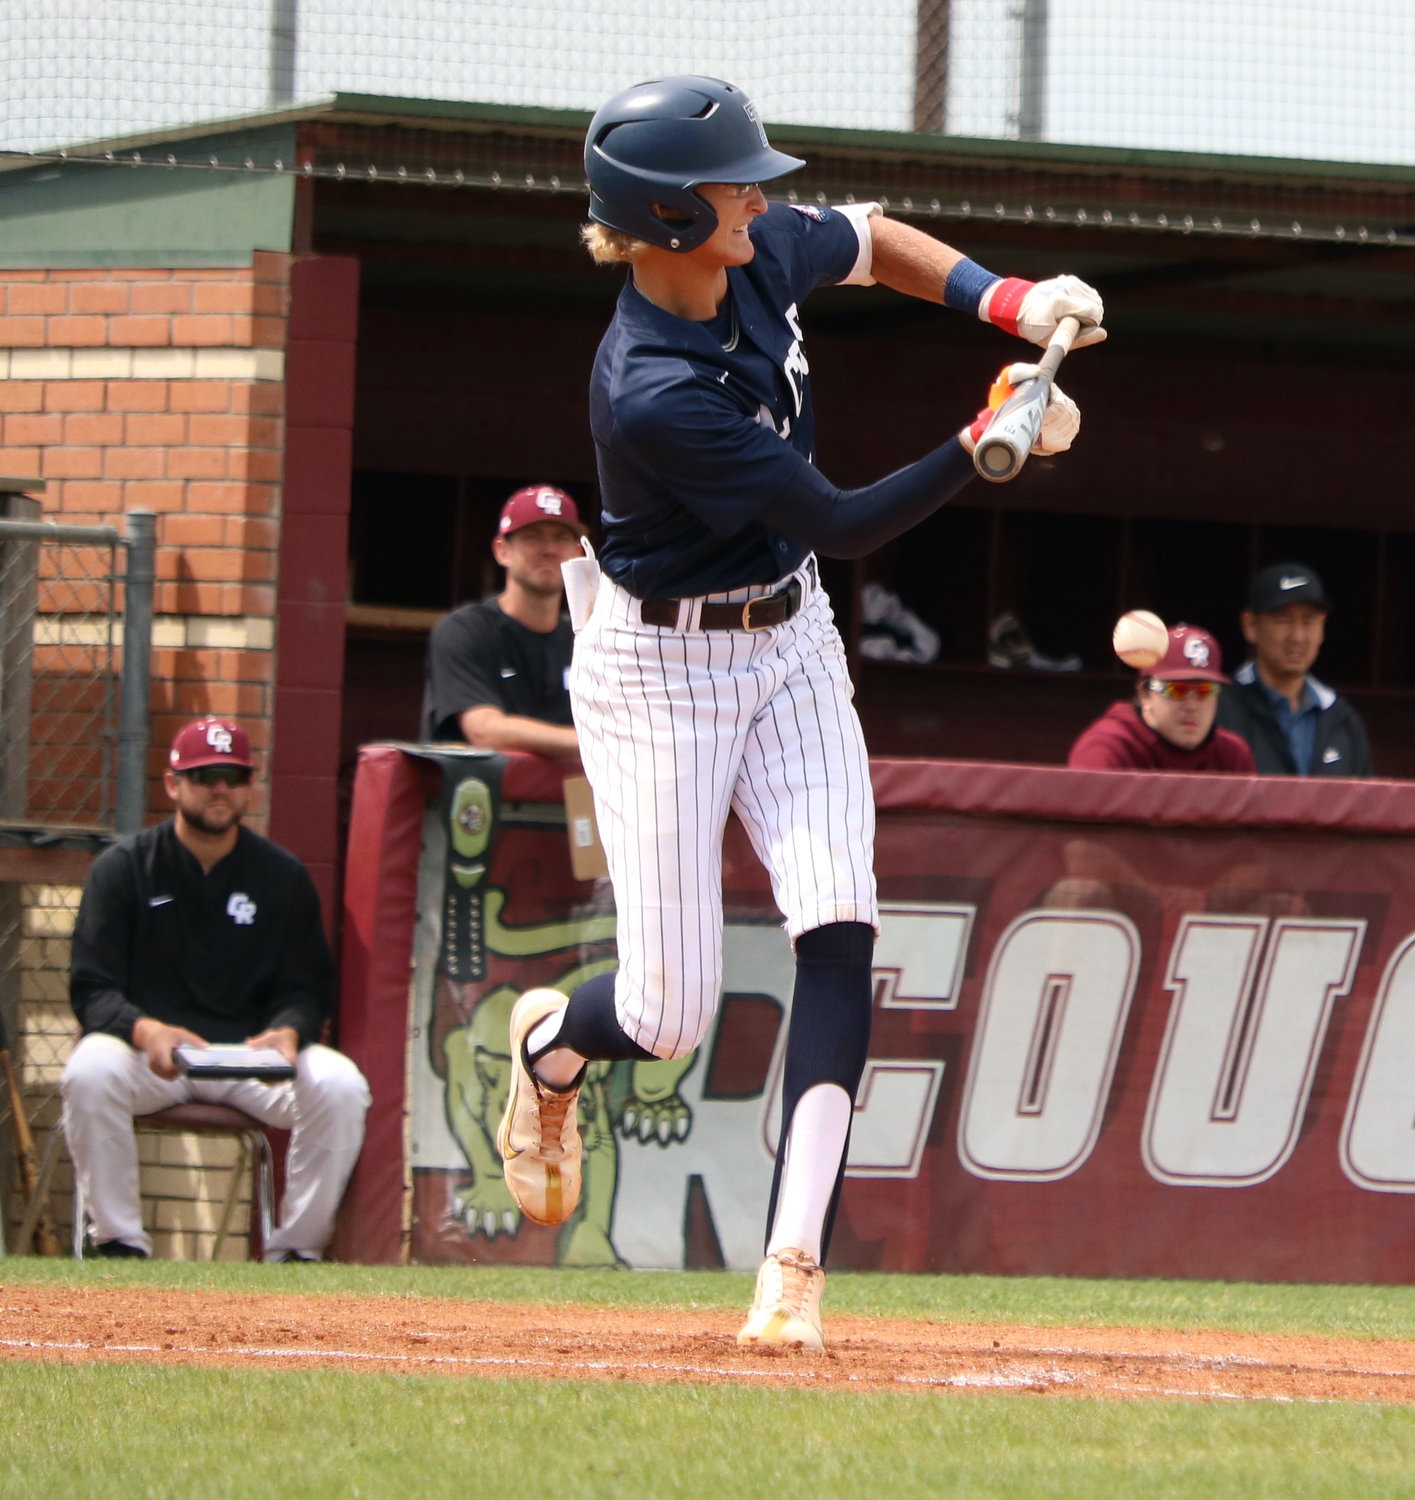 Drew Markle bunts during Tuesday's game between Tompkins and Cinco Ranch at the Cinco Ranch baseball field.